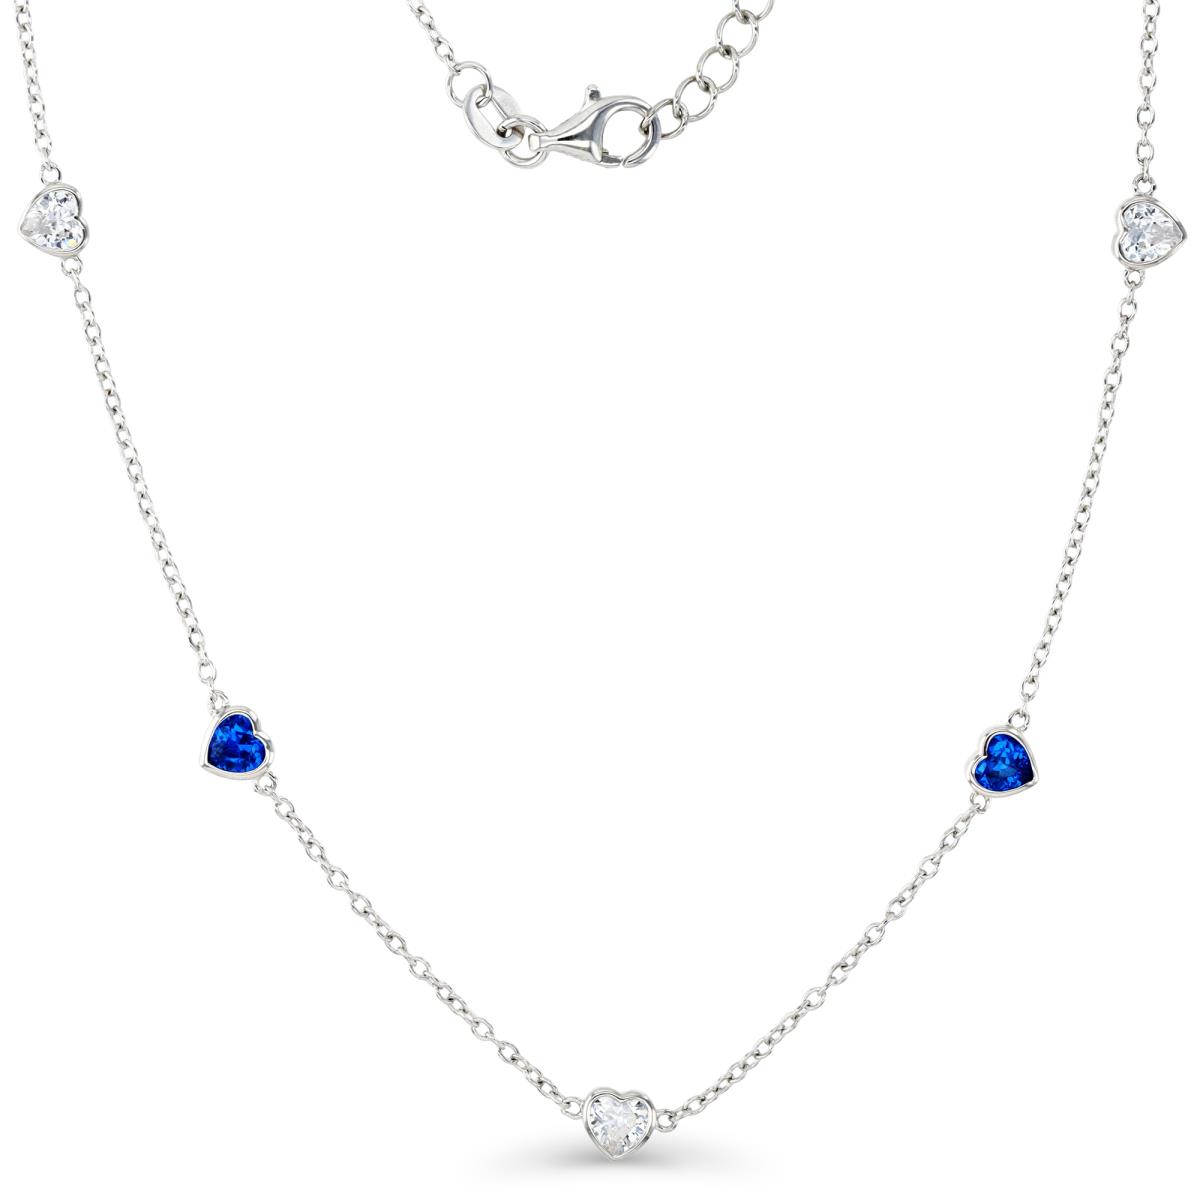 Sterling Silver Rhodium & 4MM HE Ct. Bezel Set White CZ and Cr. Spinel #113 Hearts Station 16+2" Necklace